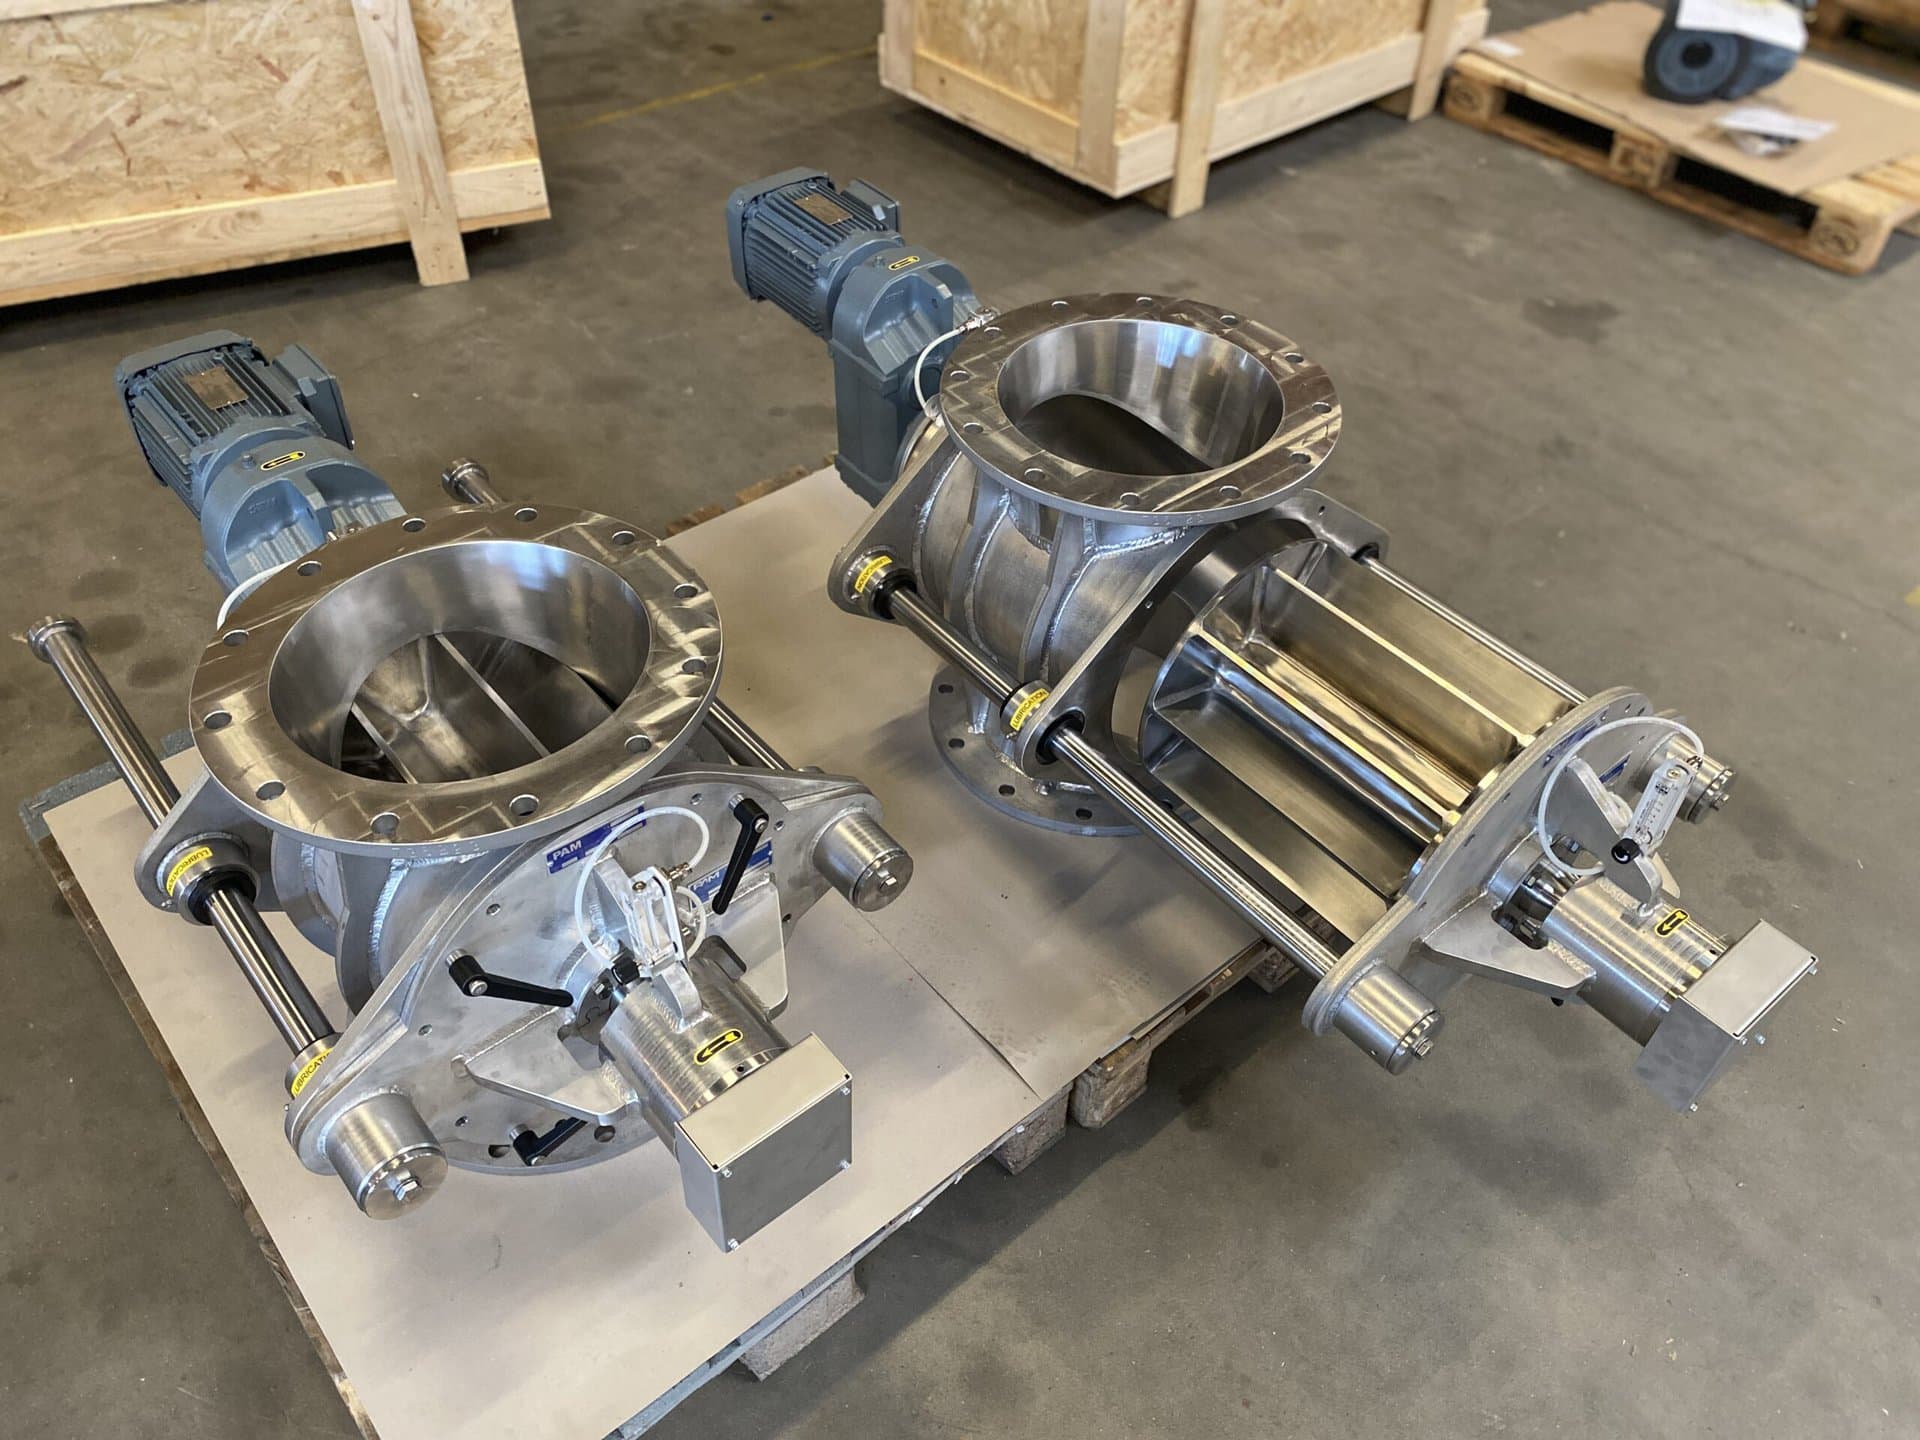 EasyClean rotary valves, ready to ship on a pallet.